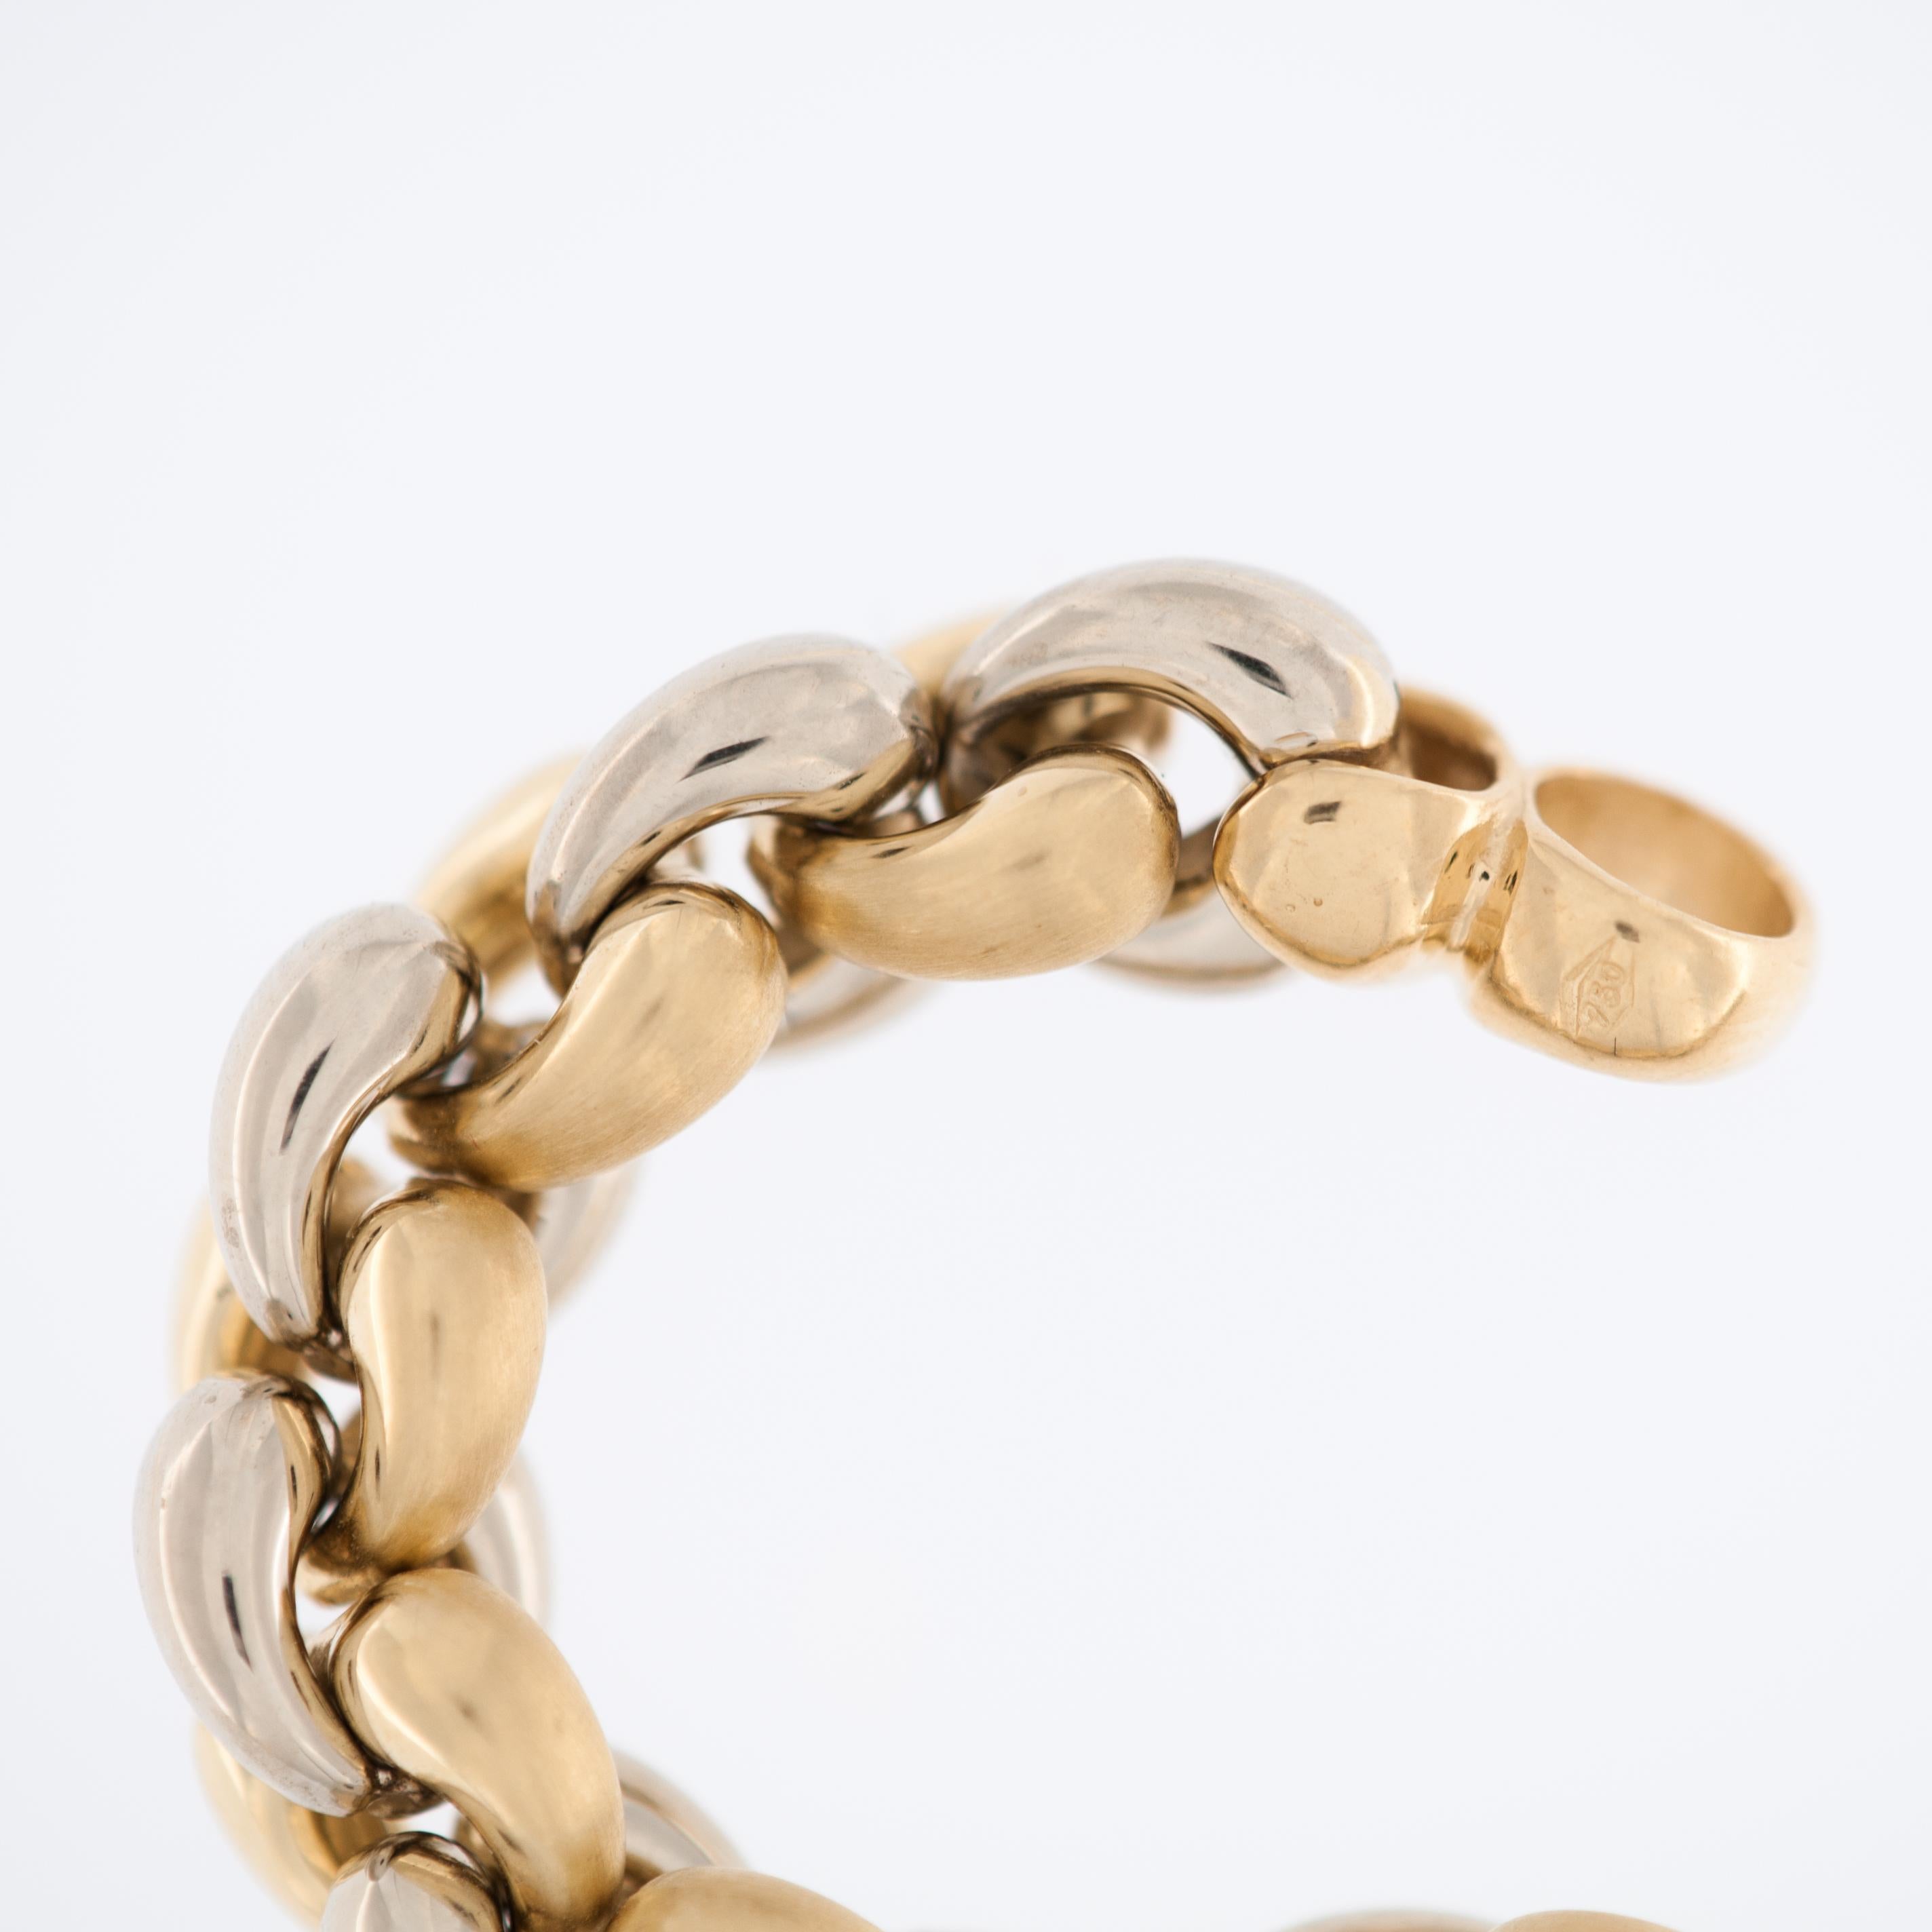 Large Links Bracelet in 18kt Yellow and White Gold In Good Condition For Sale In Esch-Sur-Alzette, LU